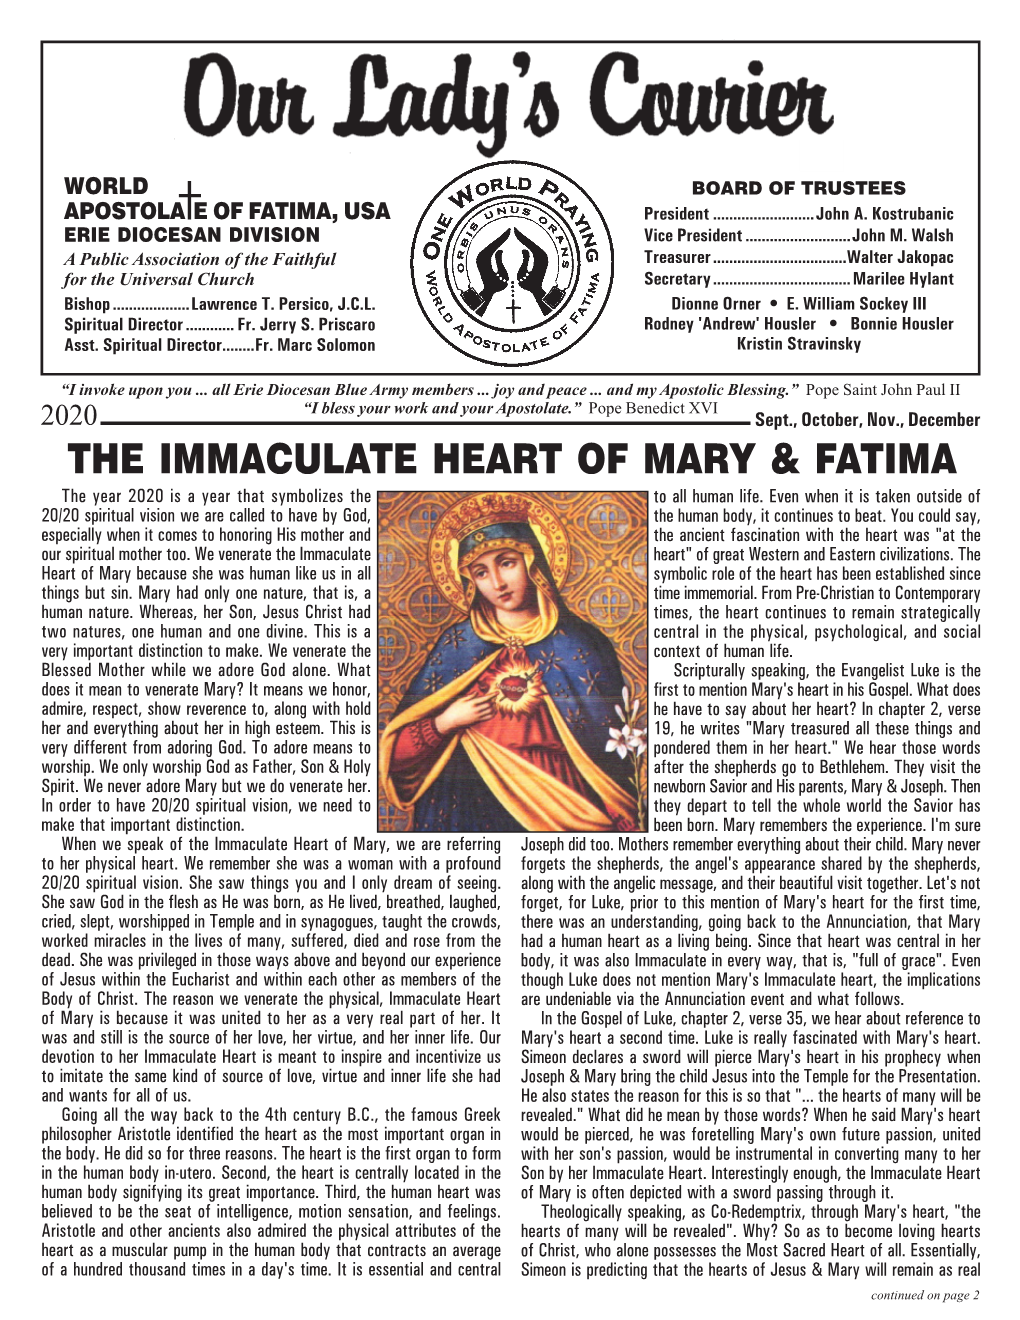 THE Immaculate HEART of MARY & FATIMA